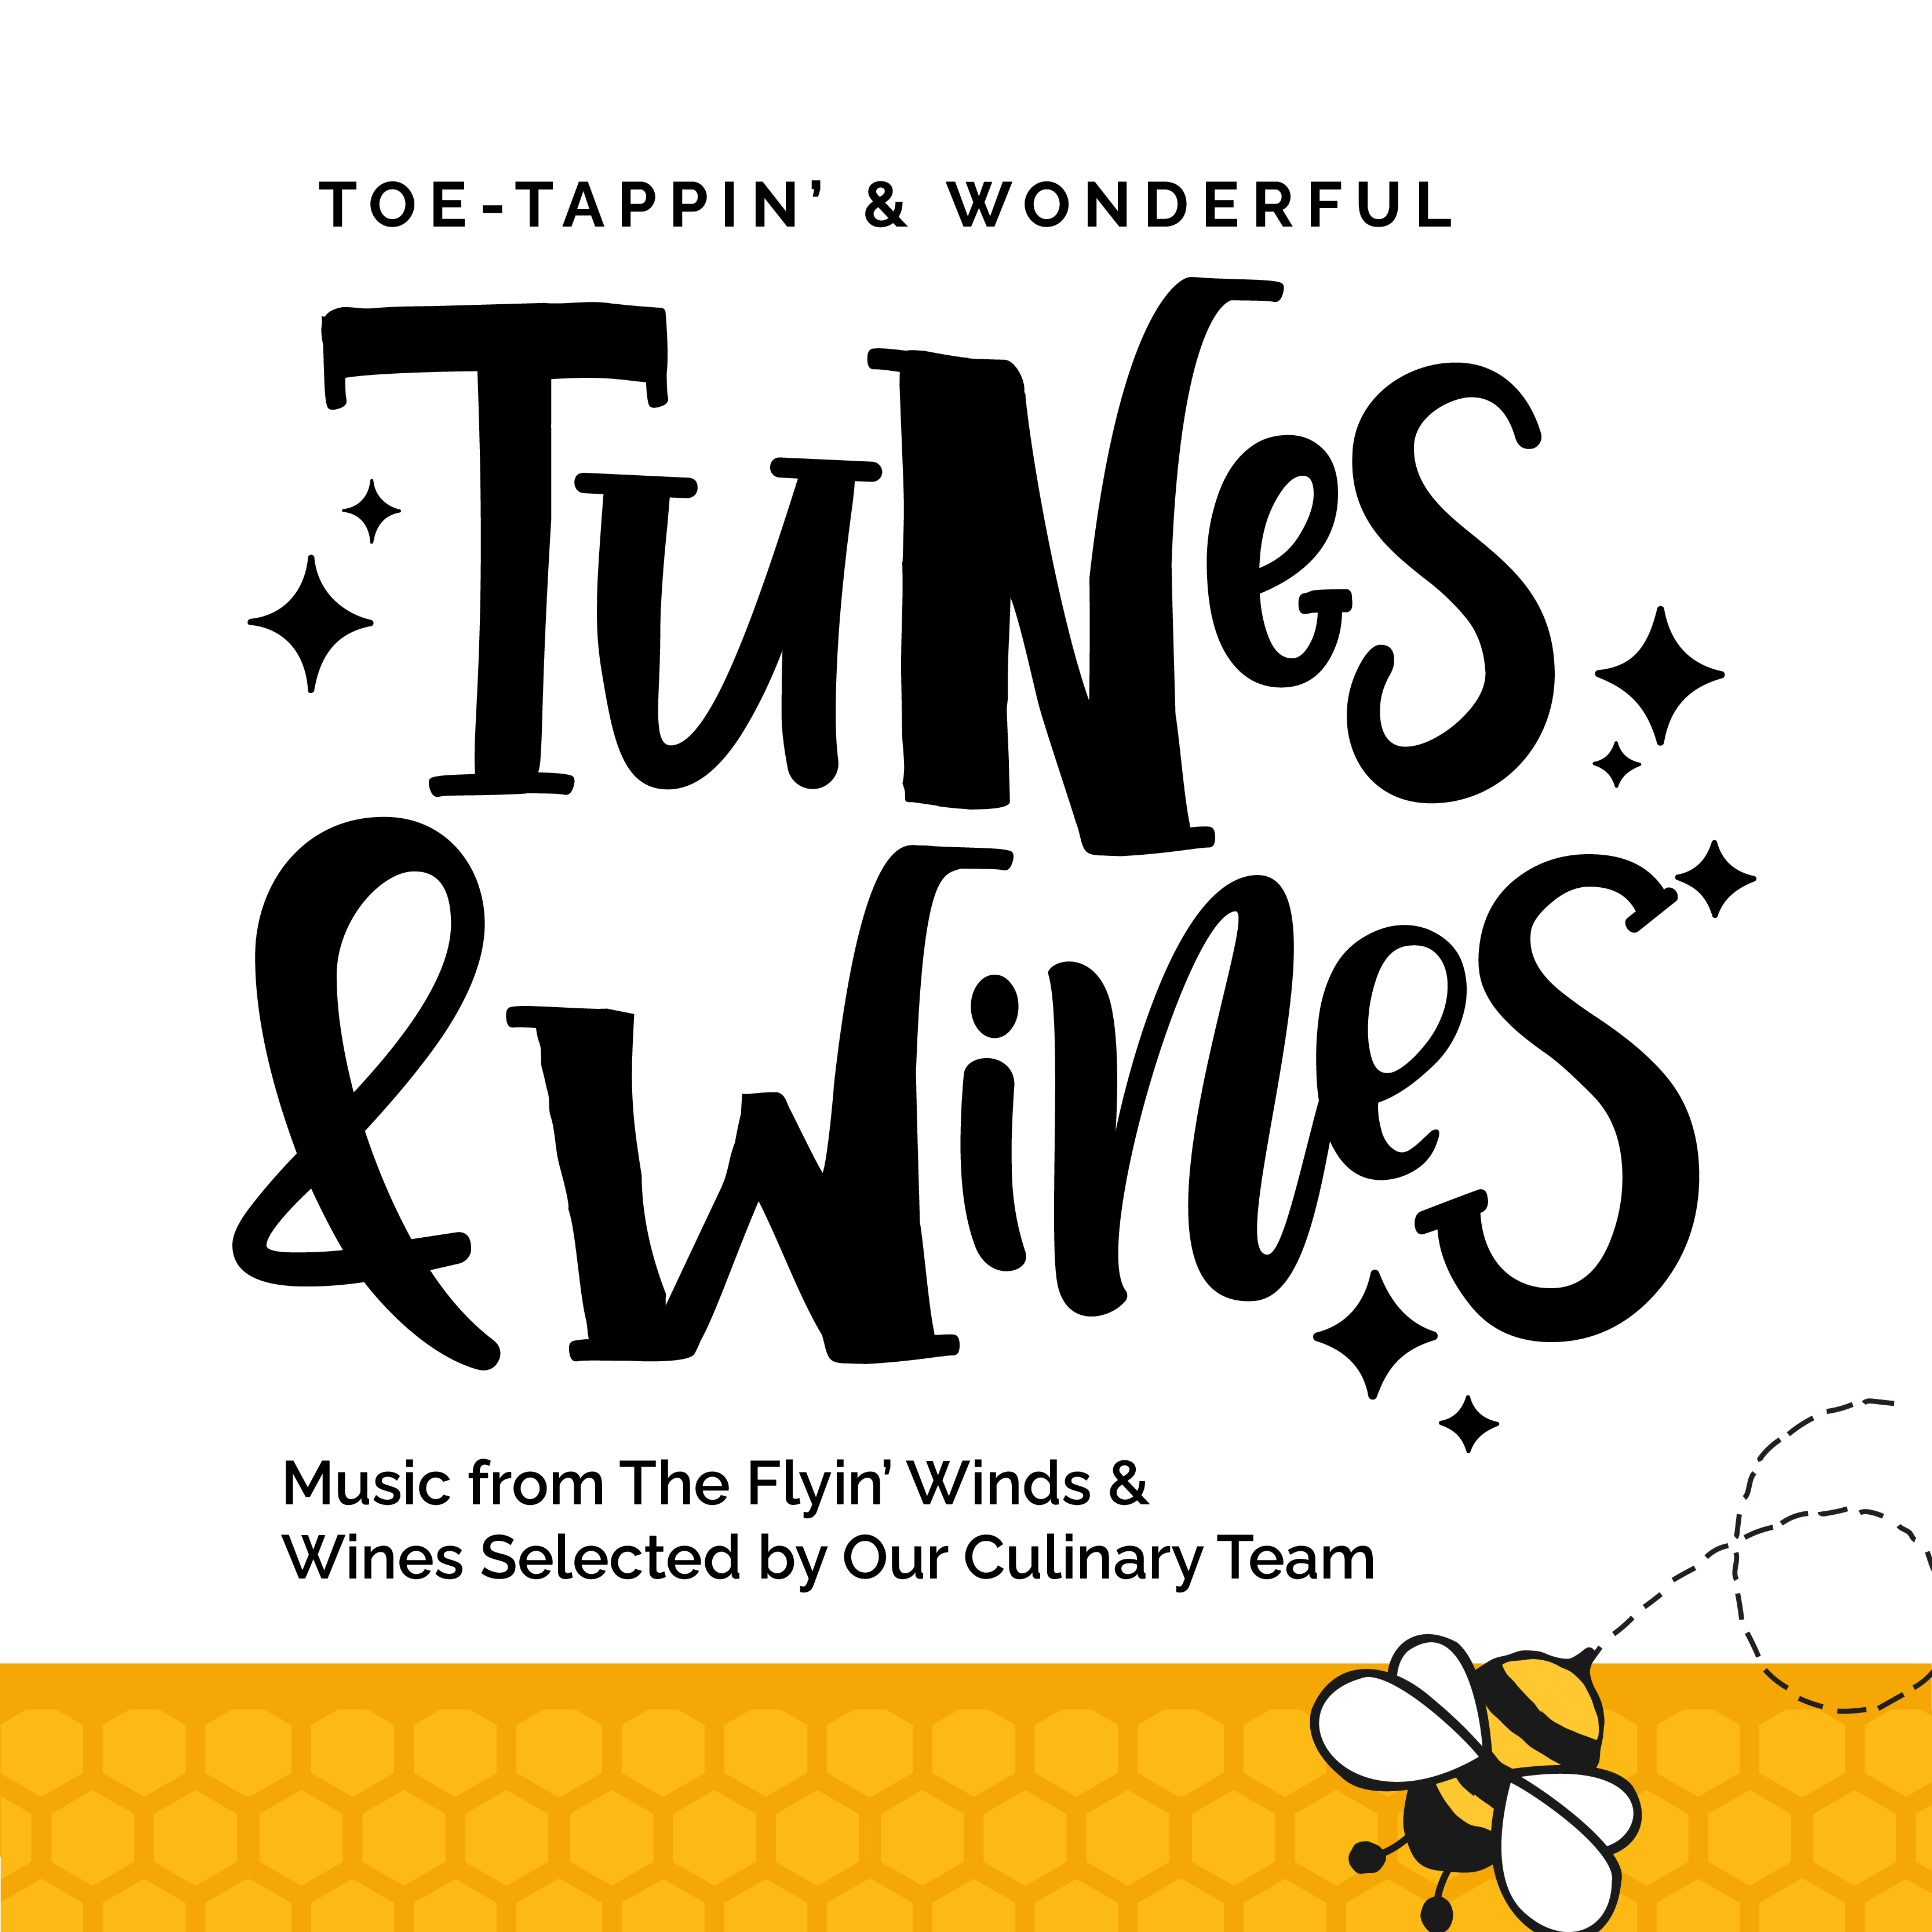 Toe-Tappin' Tunes & Wonderful Wines Event Graphic